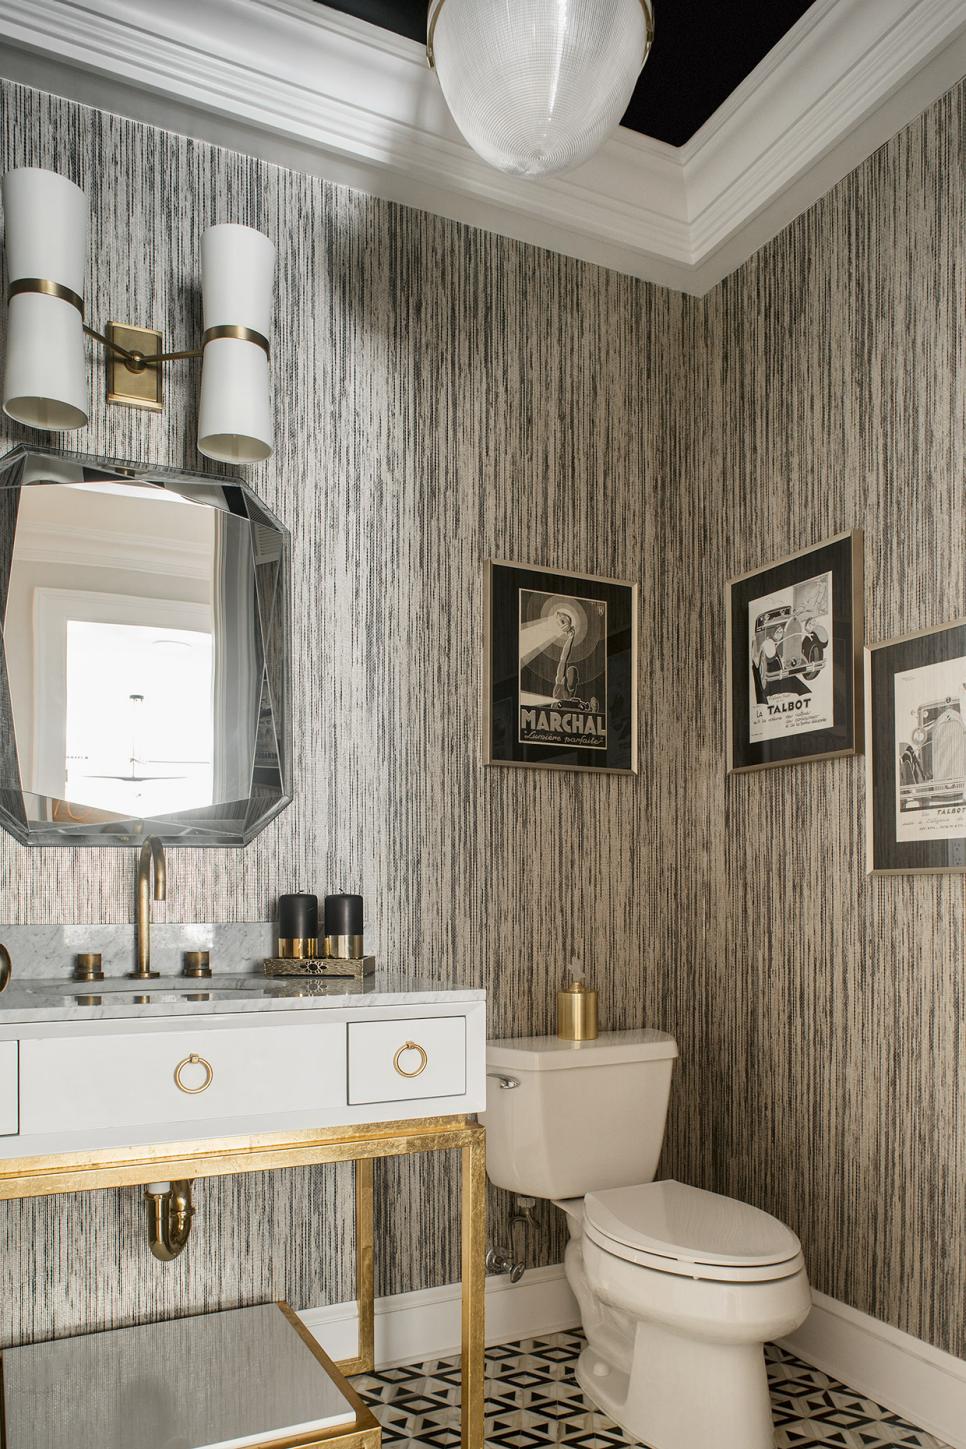 Black and White Art Deco Powder Room With Striped Wallpaper | HGTV